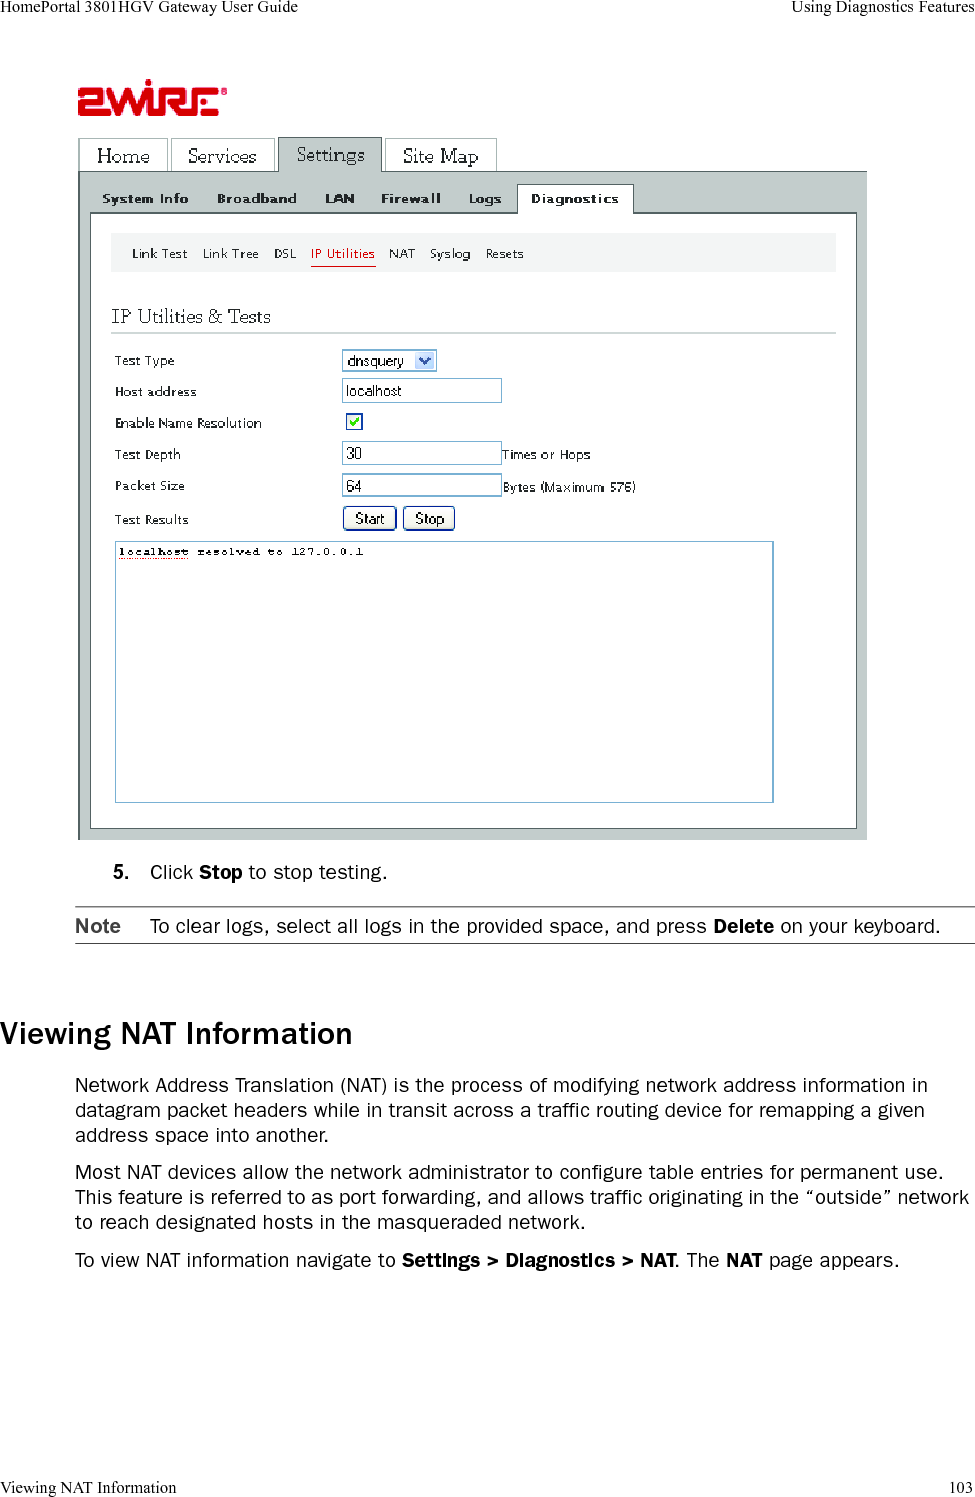 Viewing NAT Information 103HomePortal 3801HGV Gateway User Guide Using Diagnostics Features5. Click Stop to stop testing.Note To clear logs, select all logs in the provided space, and press Delete on your keyboard.Viewing NAT InformationNetwork Address Translation (NAT) is the process of modifying network address information in datagram packet headers while in transit across a traffic routing device for remapping a given address space into another.Most NAT devices allow the network administrator to configure table entries for permanent use. This feature is referred to as port forwarding, and allows traffic originating in the “outside” network to reach designated hosts in the masqueraded network.To view NAT information navigate to Settings &gt; Diagnostics &gt; NAT. The NAT page appears.